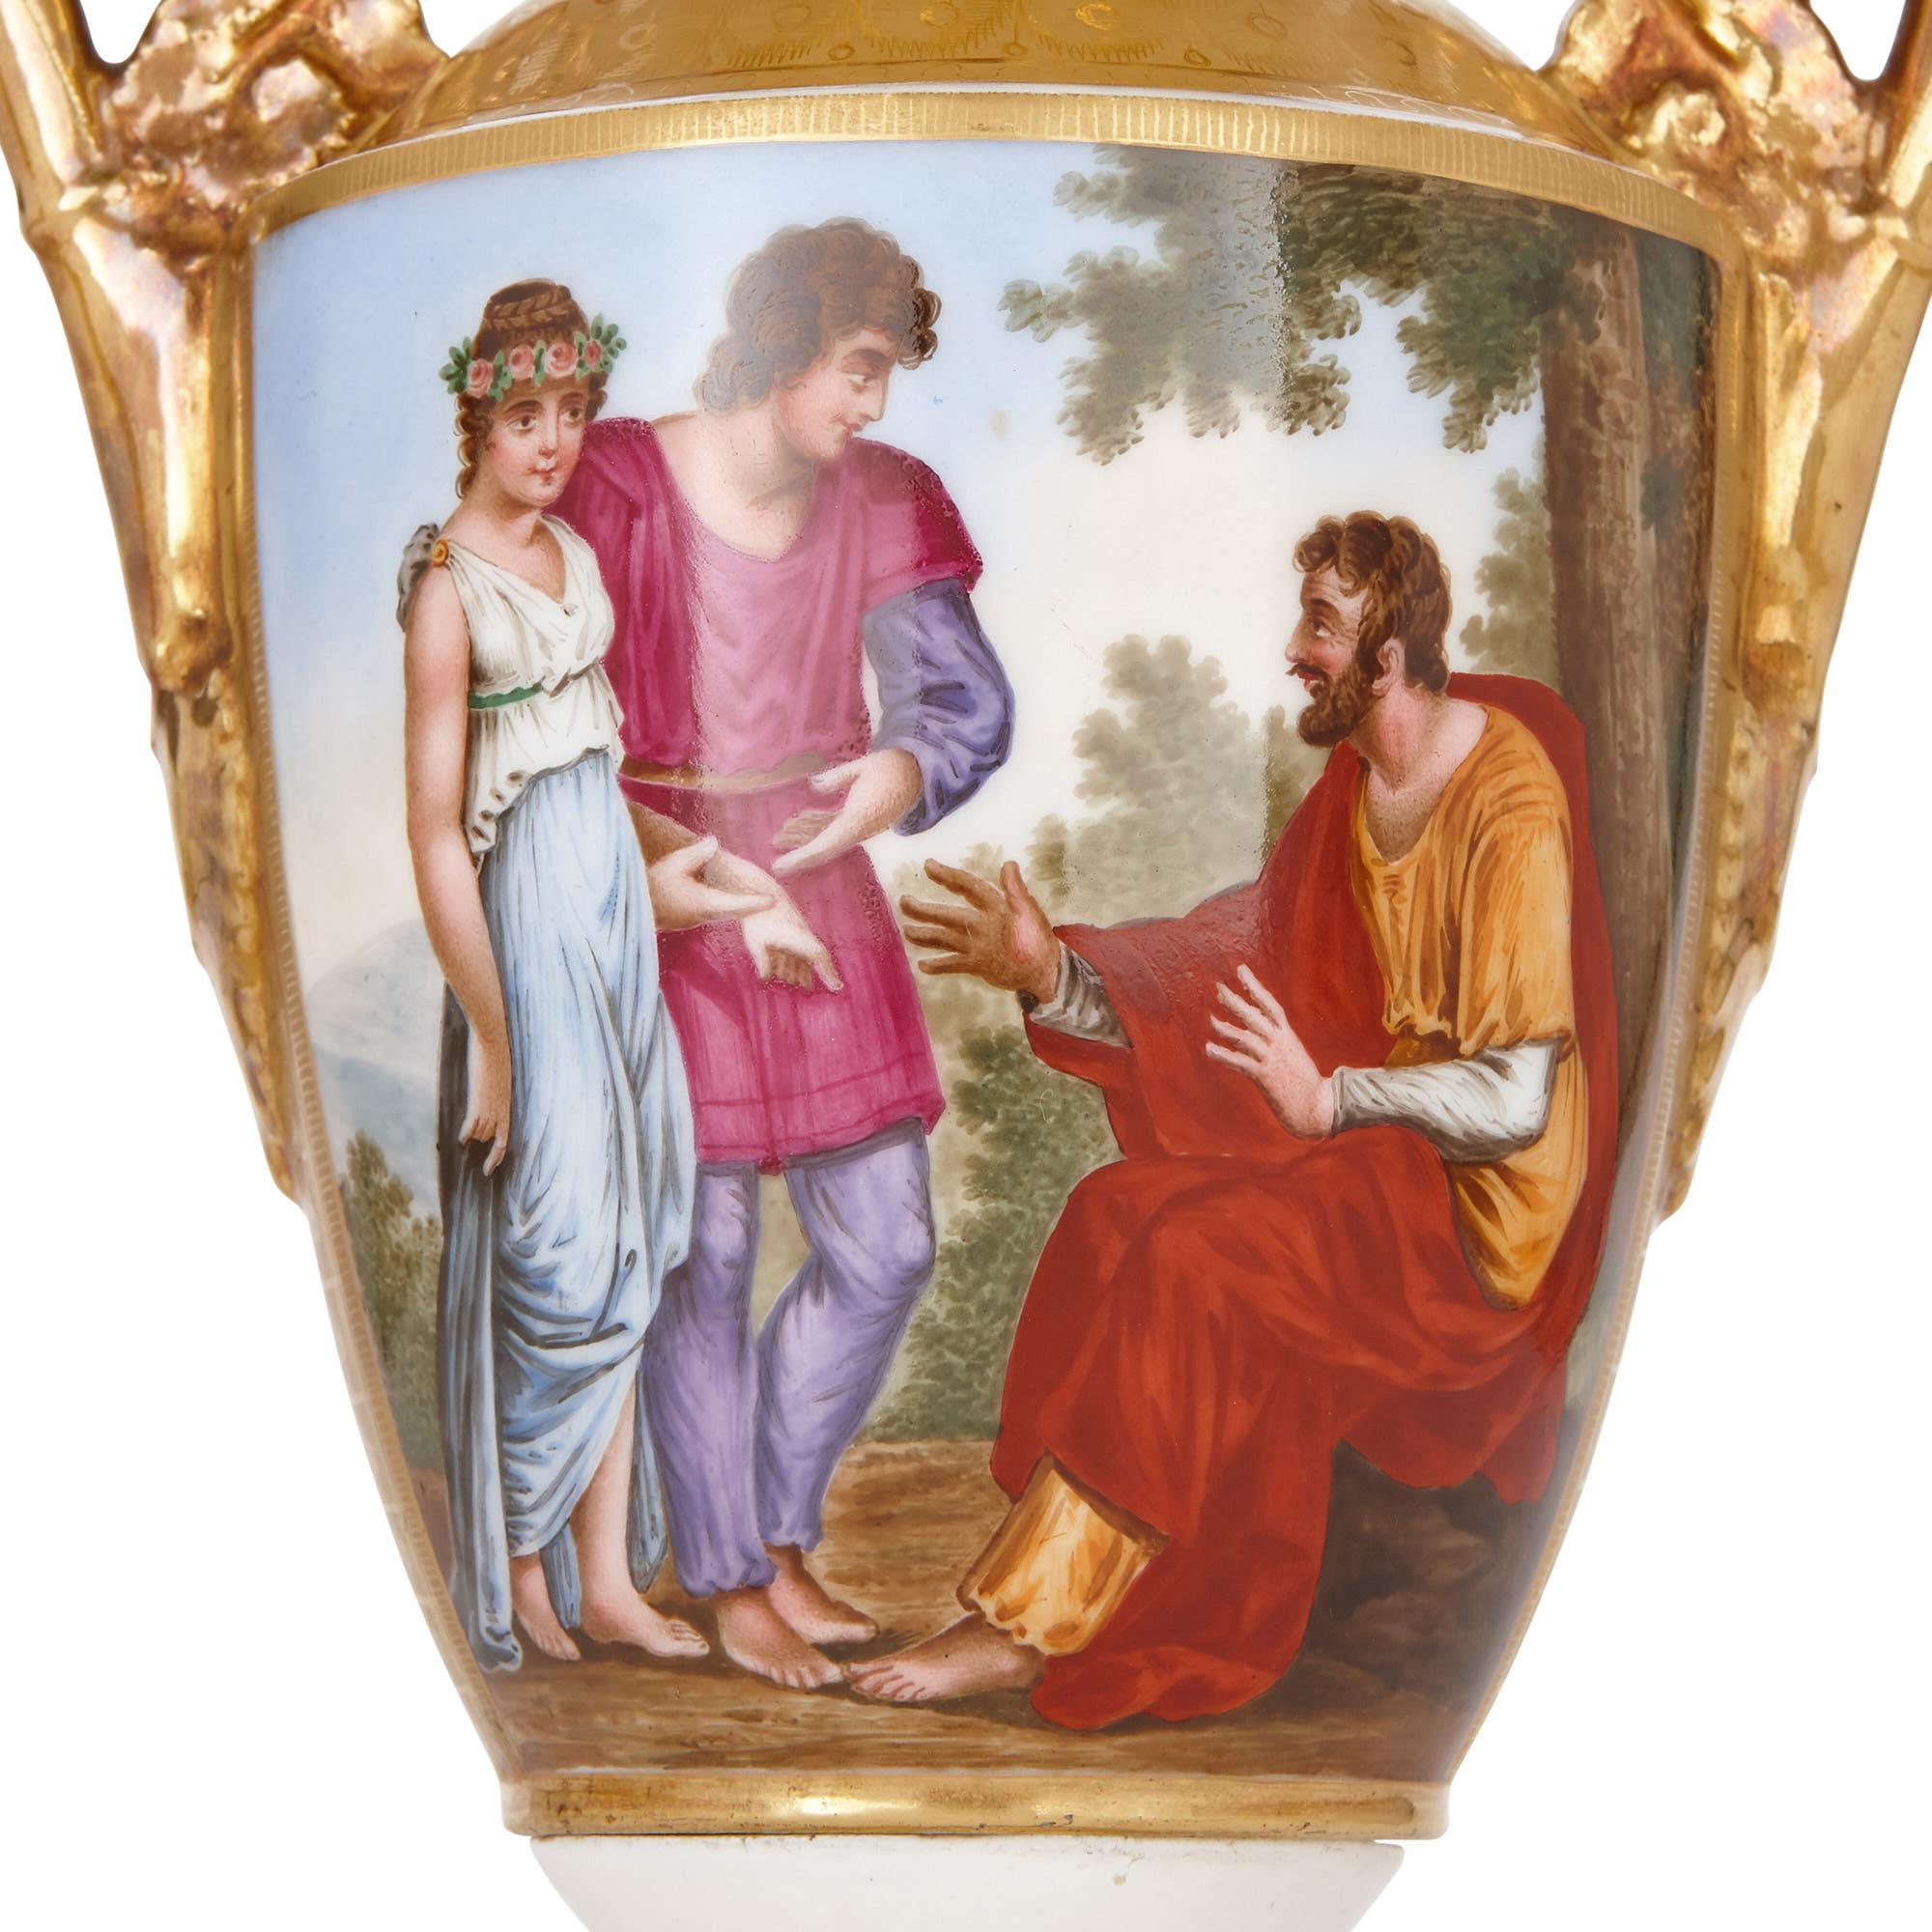 These elegant porcelain vases were crafted in France in 1825-1835. They are designed in the Renaissance style, shaped like Greek Amphora vases, and painted with classically-inspired scenes. 

The white porcelain vases have gilt mouths, set on gilt